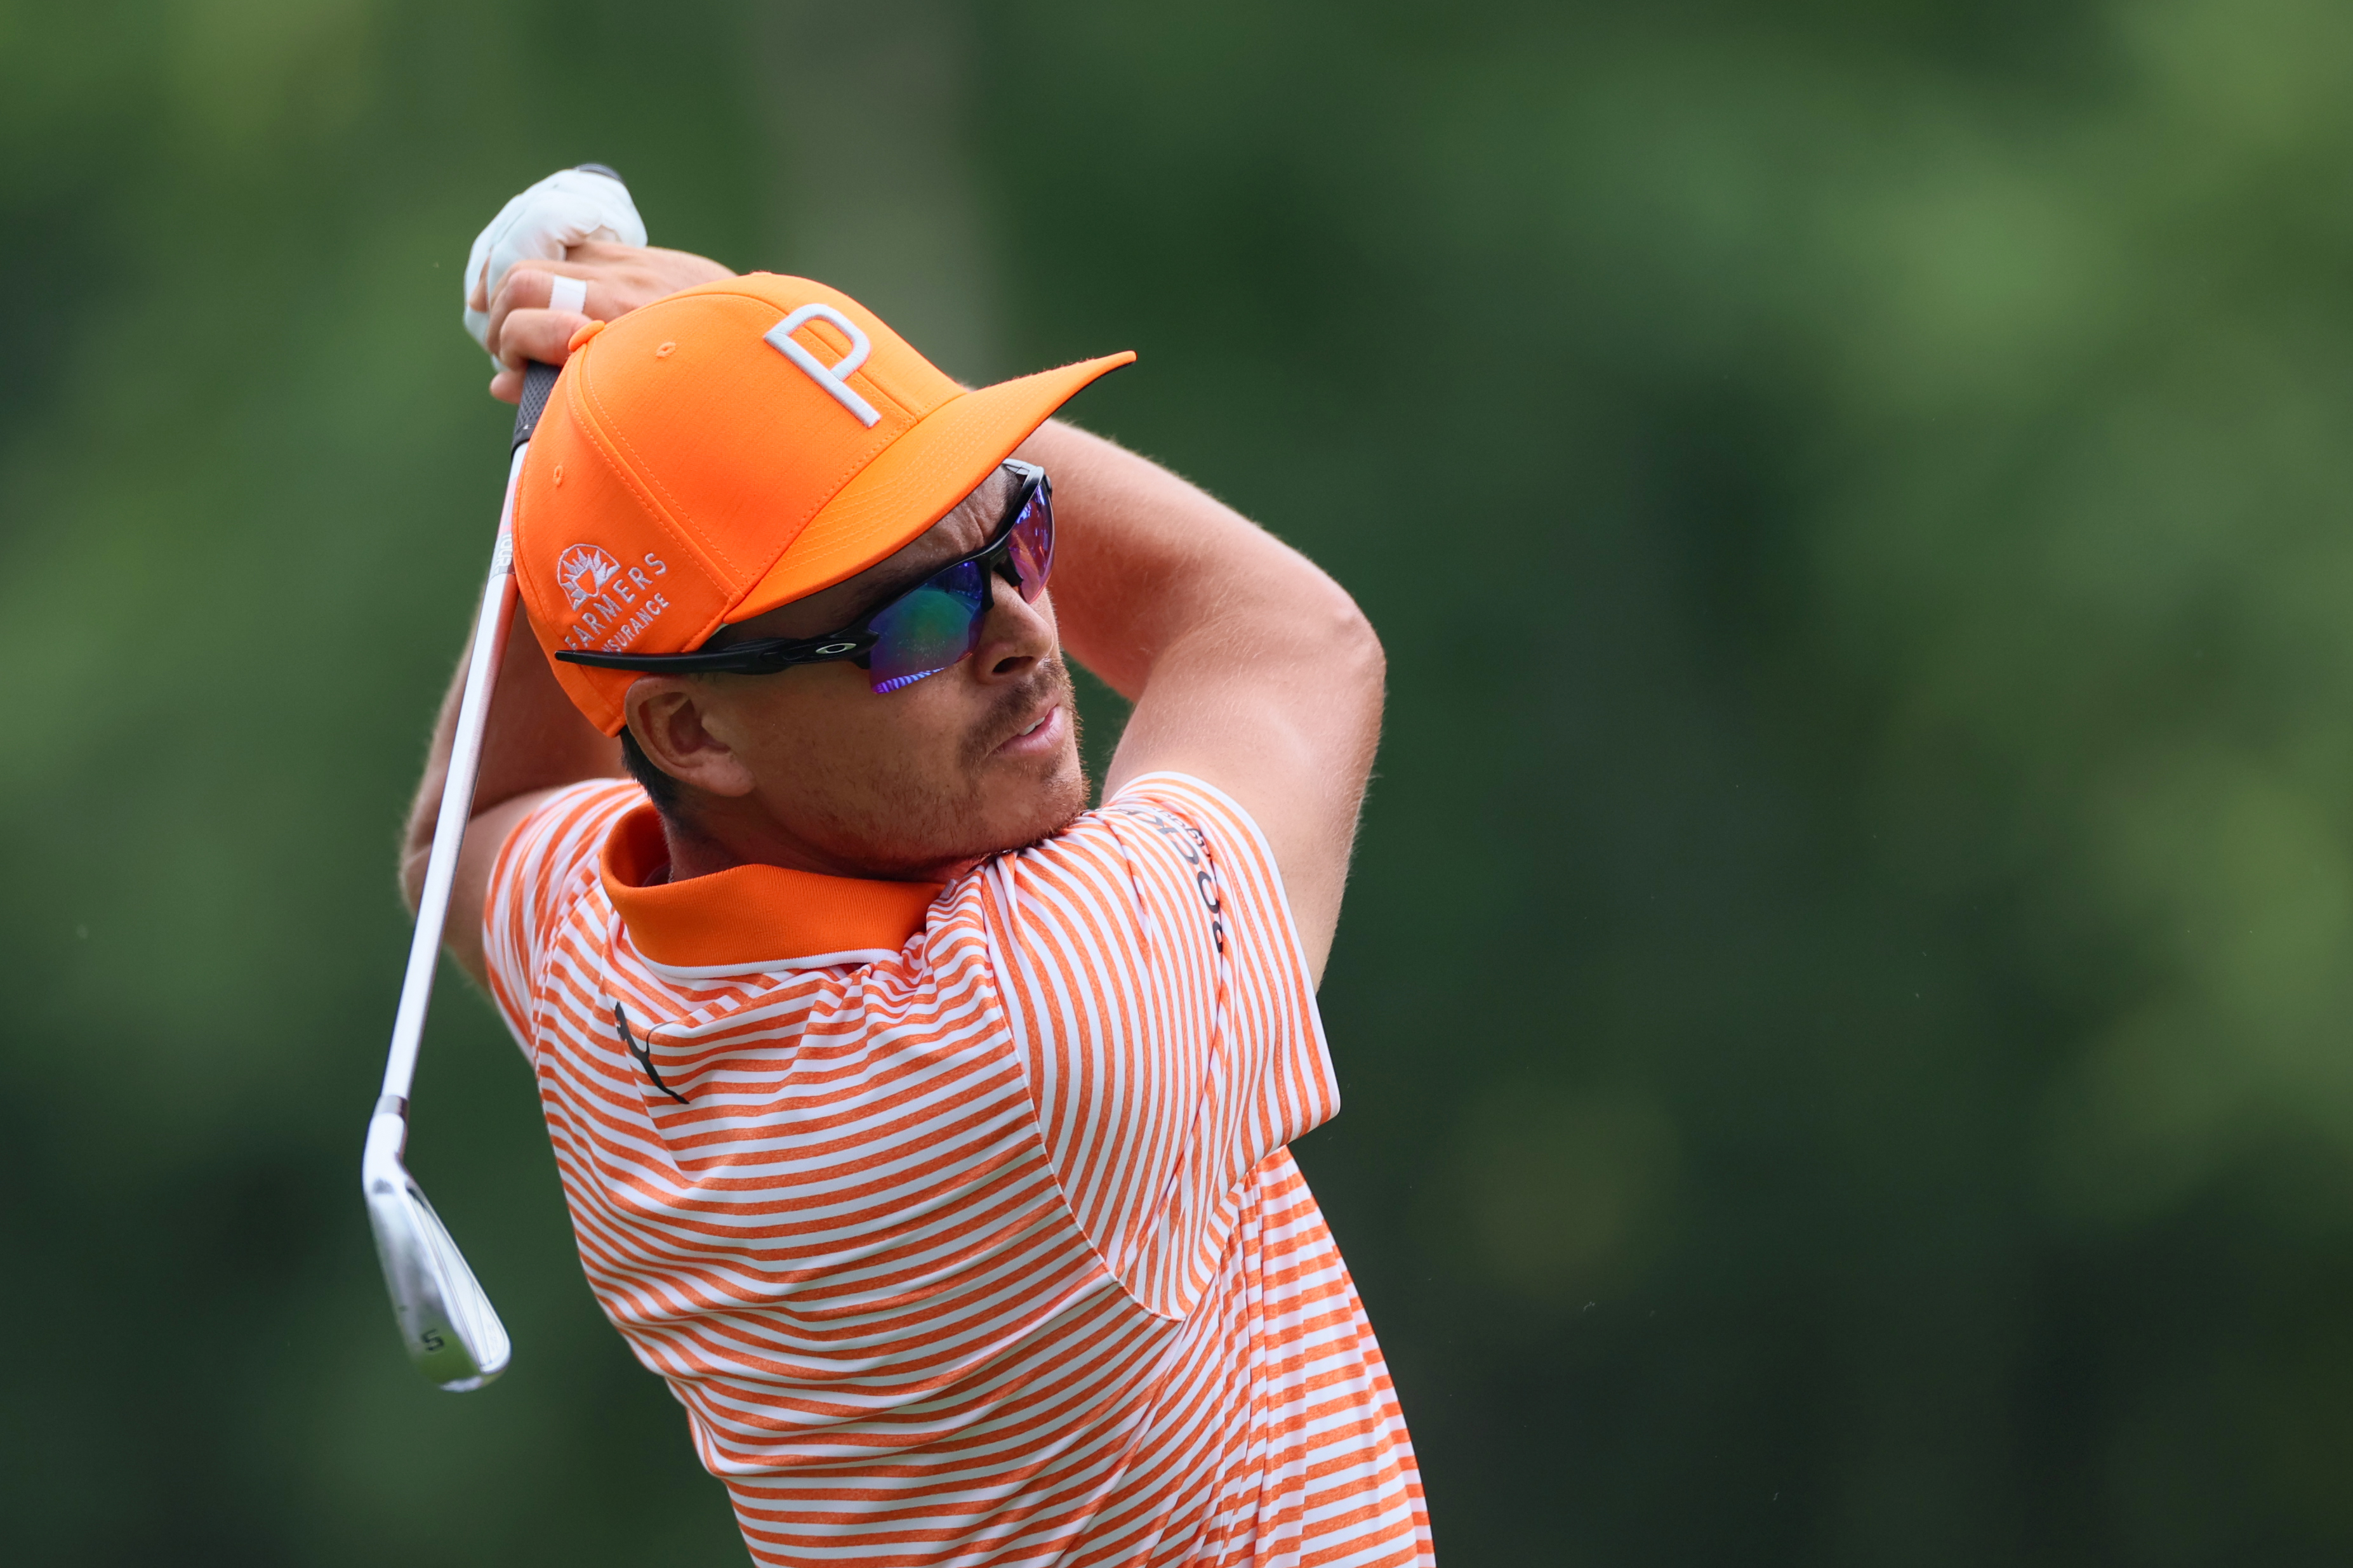 The clubs Rickie Fowler used to win the 2023 Rocket Mortgage